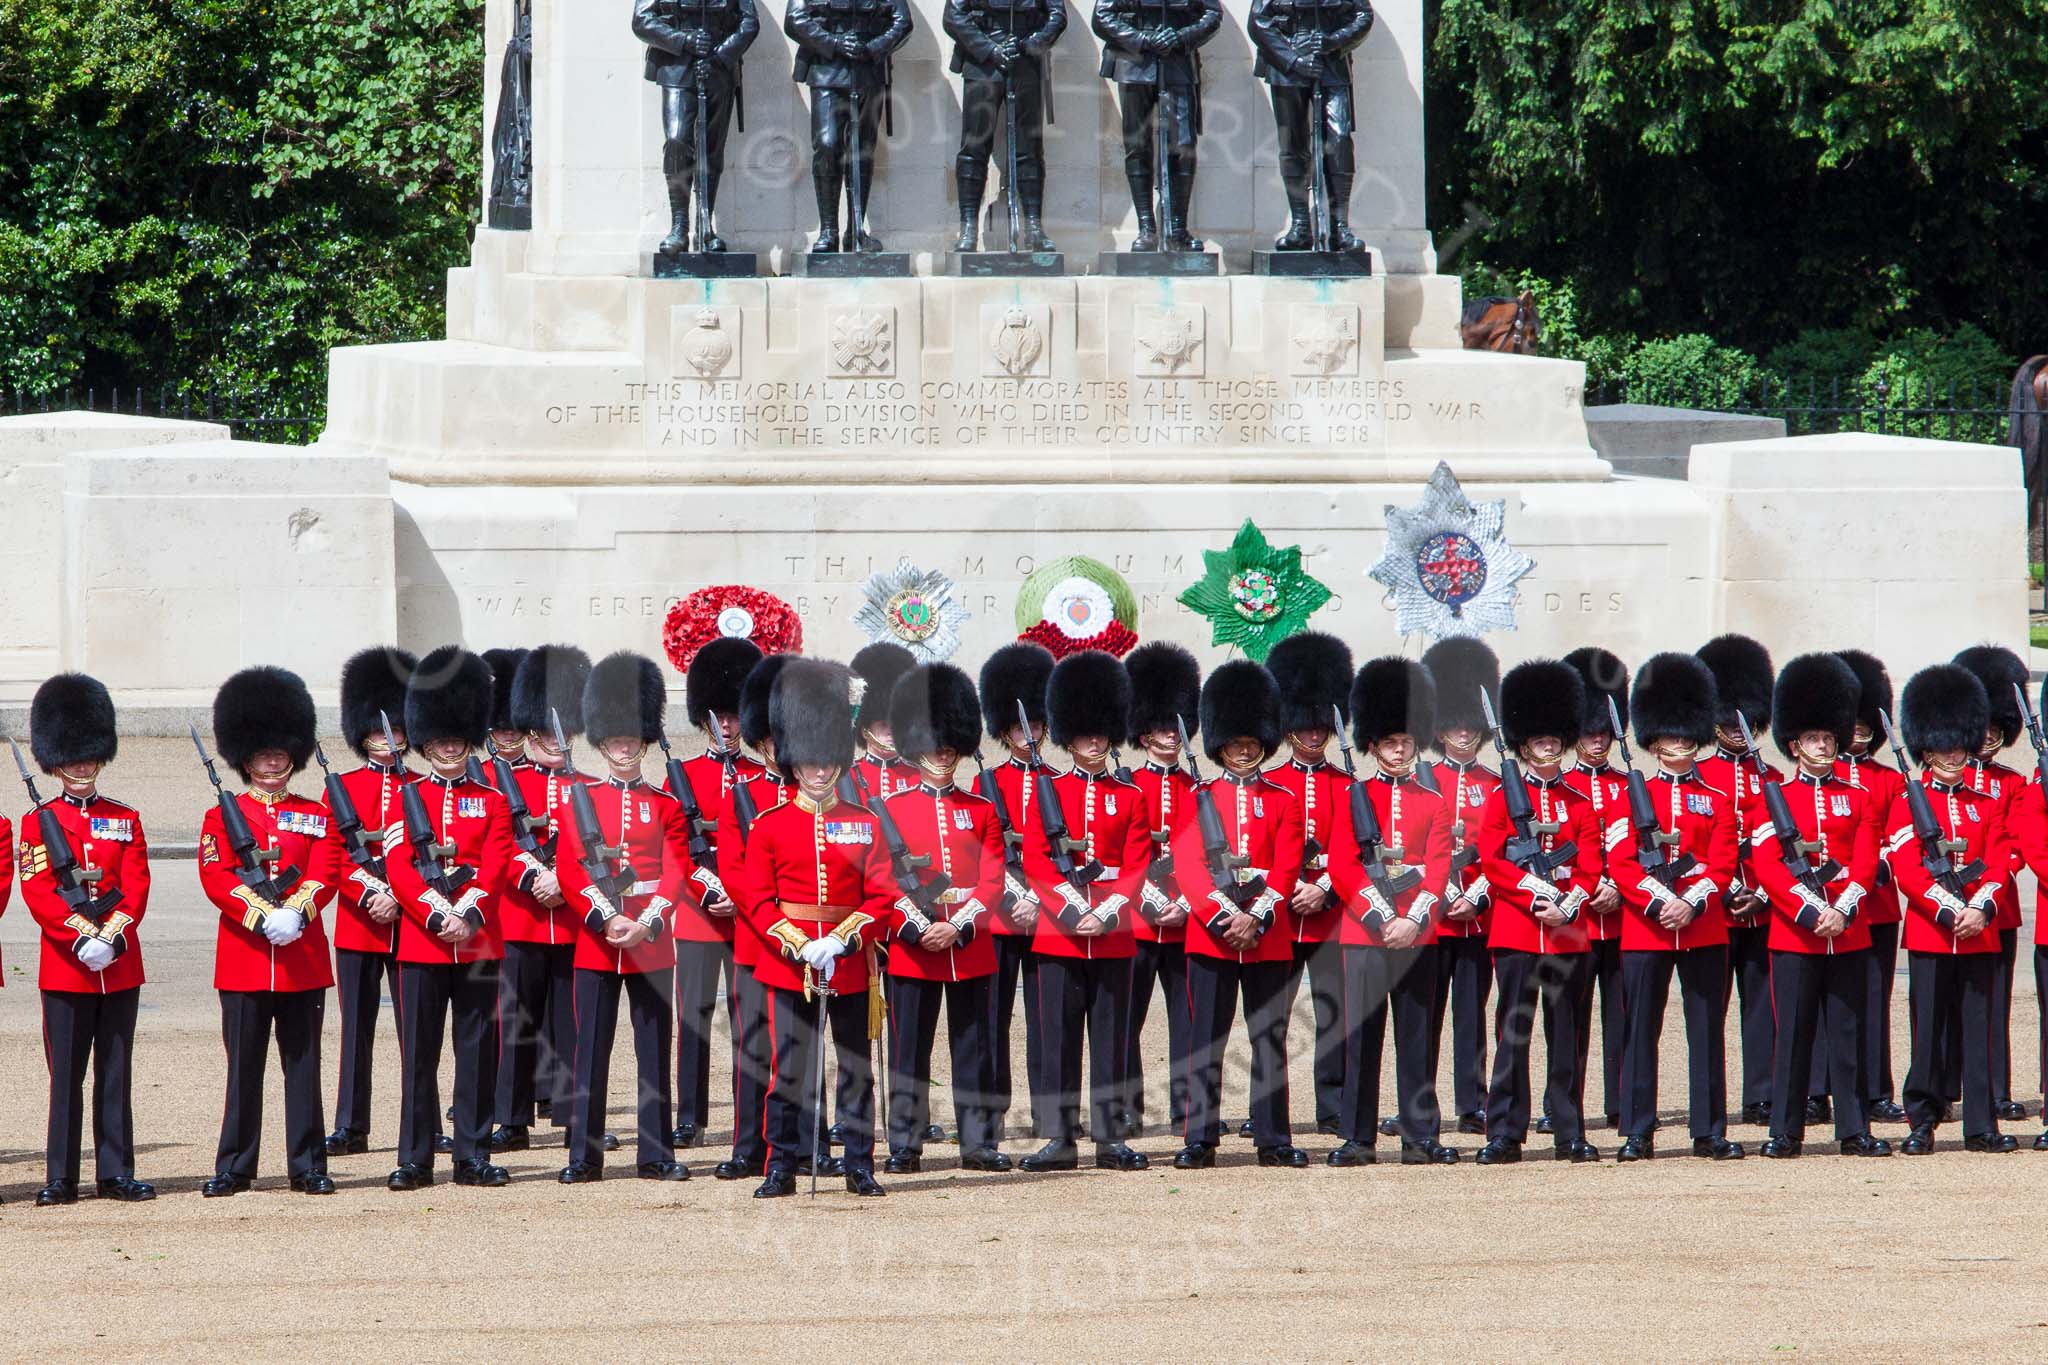 Trooping the Colour 2013: No. 3 Guard, 1st Battalion Welsh Guards, is back in position in front of the Guards Memorial after closing the gap. Image #223, 15 June 2013 10:53 Horse Guards Parade, London, UK